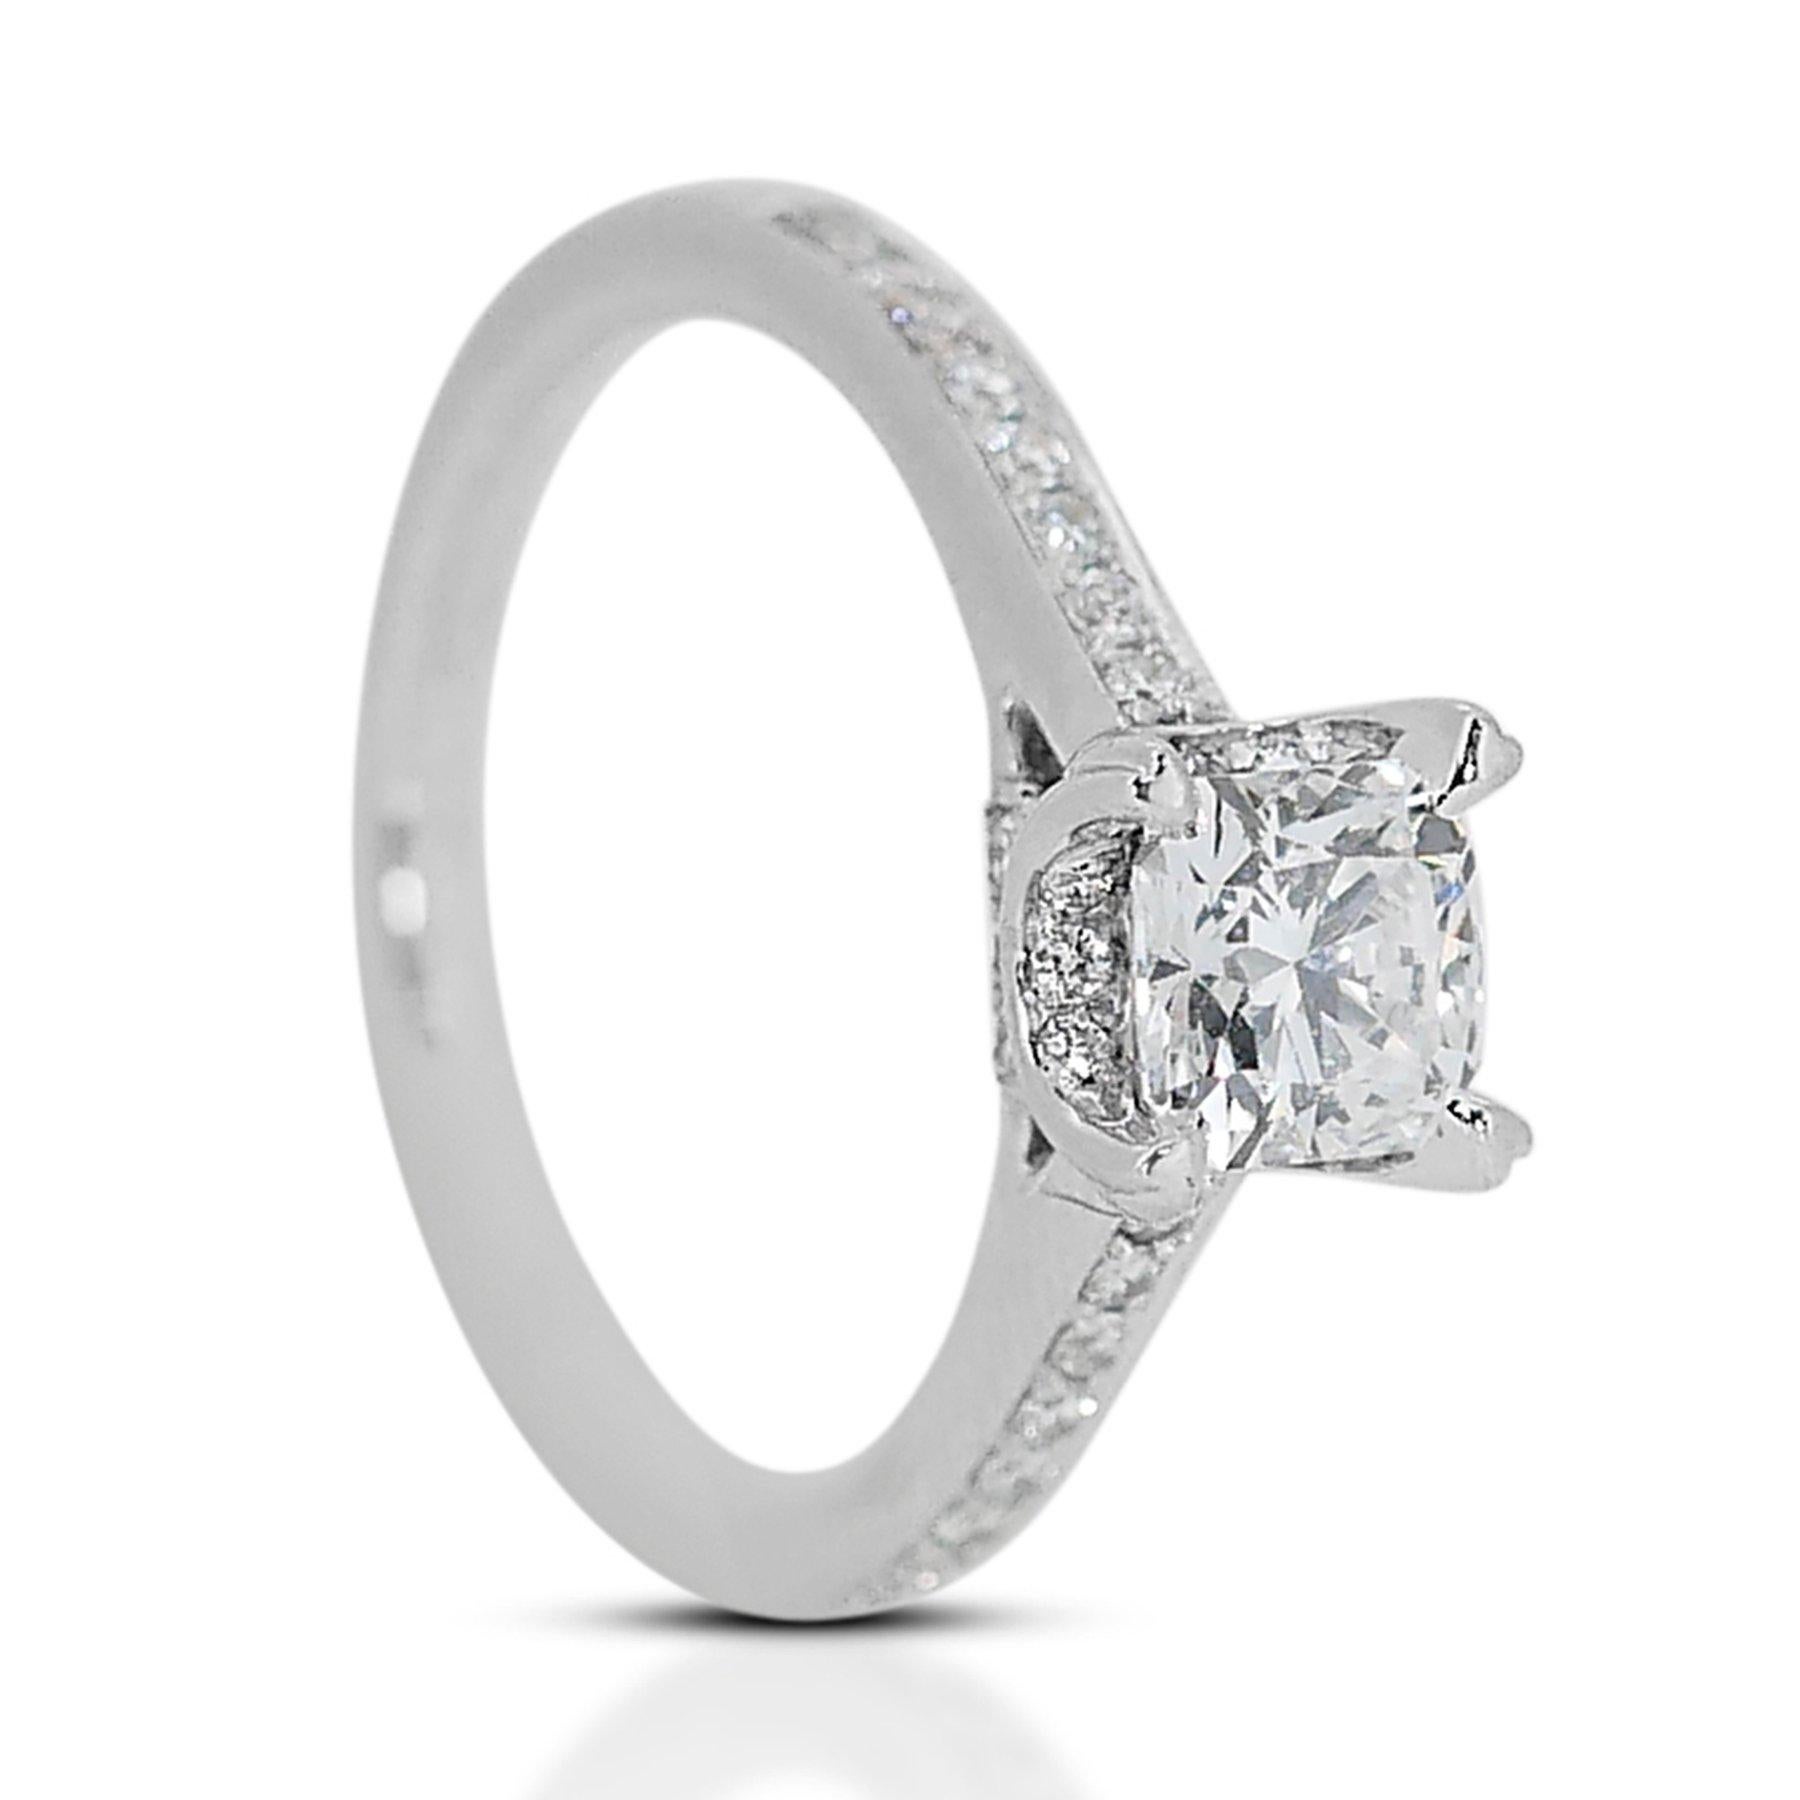 Glamorous 0.87ct Halo Diamond Ring in 18K White Gold In New Condition For Sale In רמת גן, IL